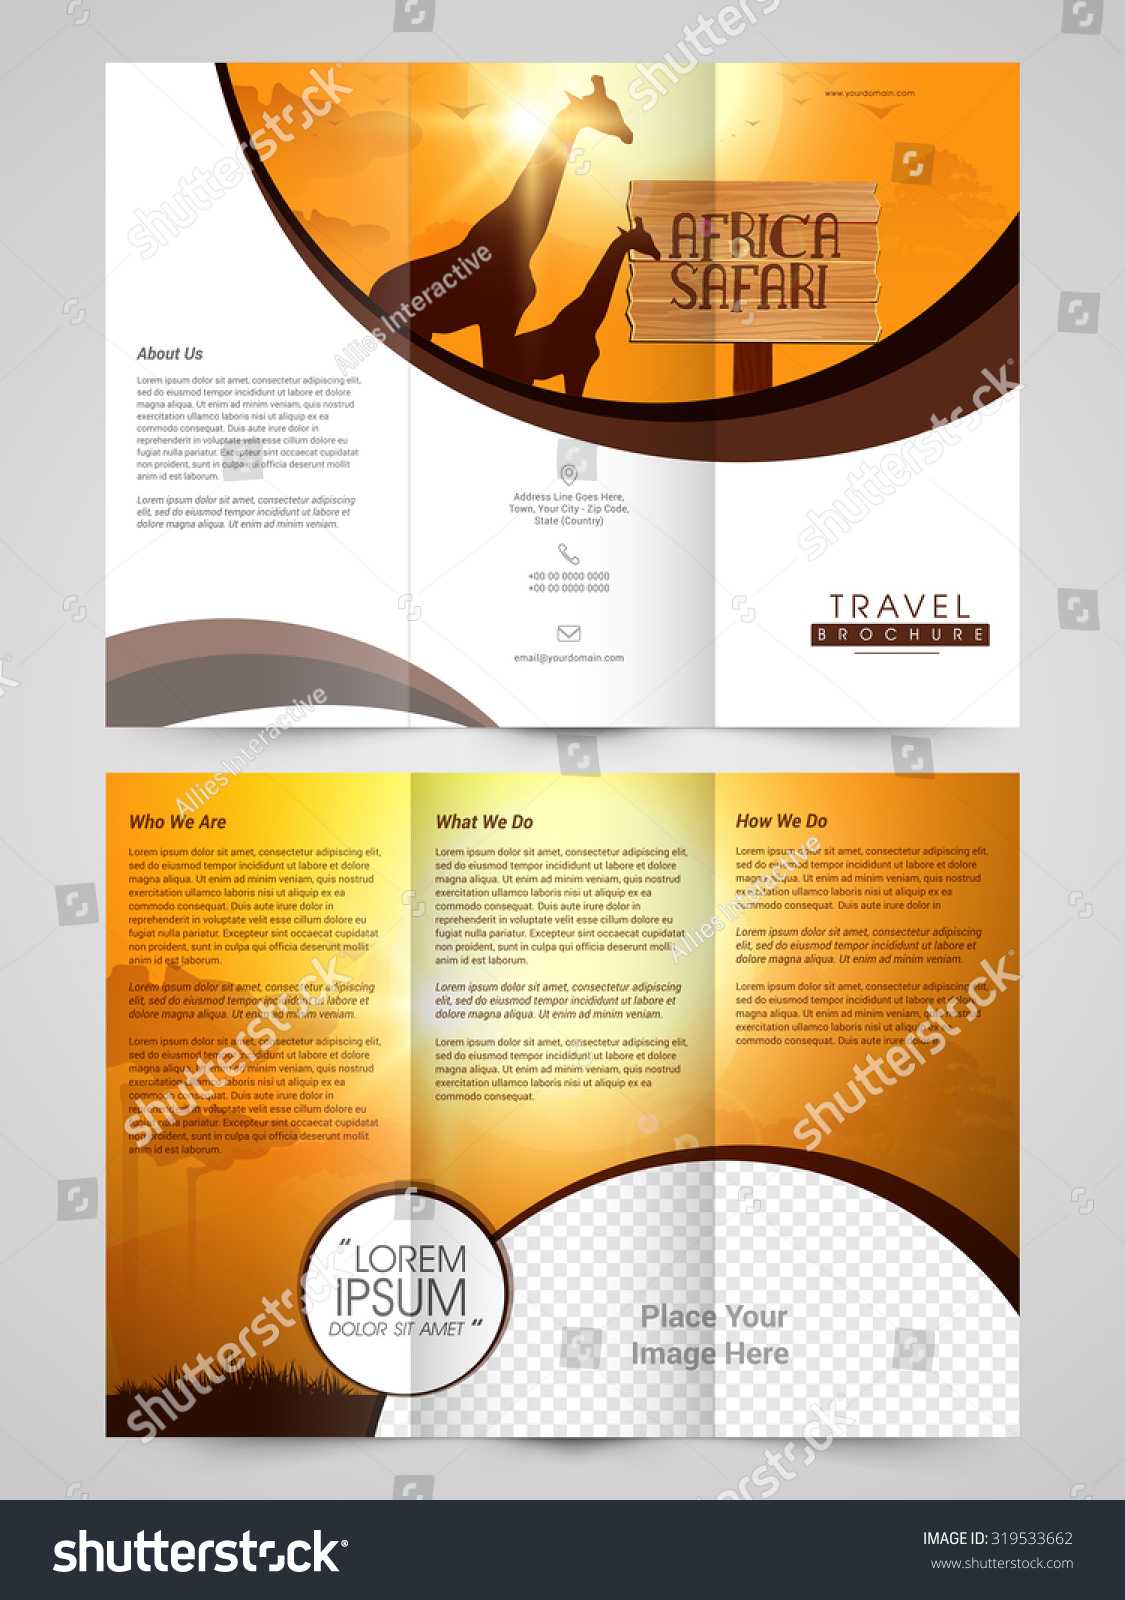 Creative Travel Trifold Brochure Template Flyer Stock Vector Inside Country Brochure Template